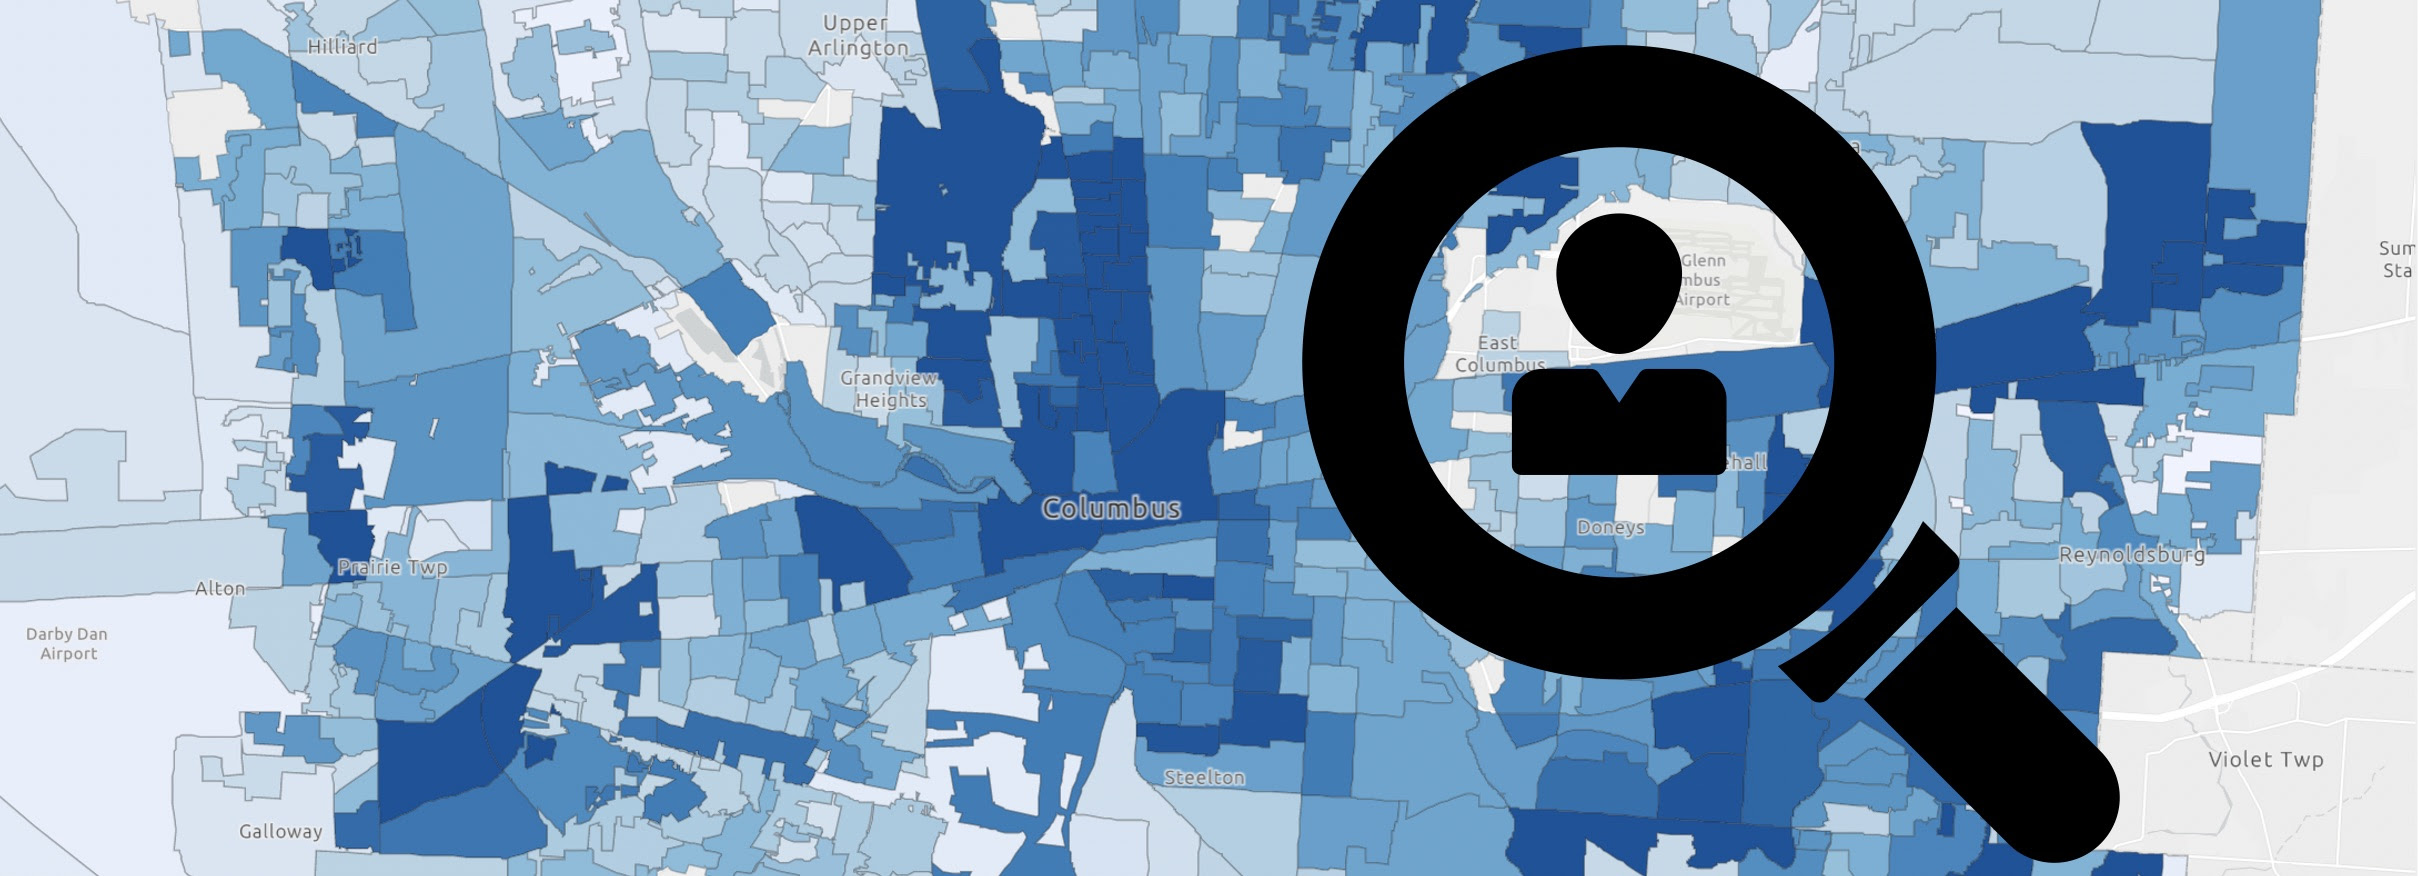 Canvas smarter: Enhance voter files with targeting data and maps